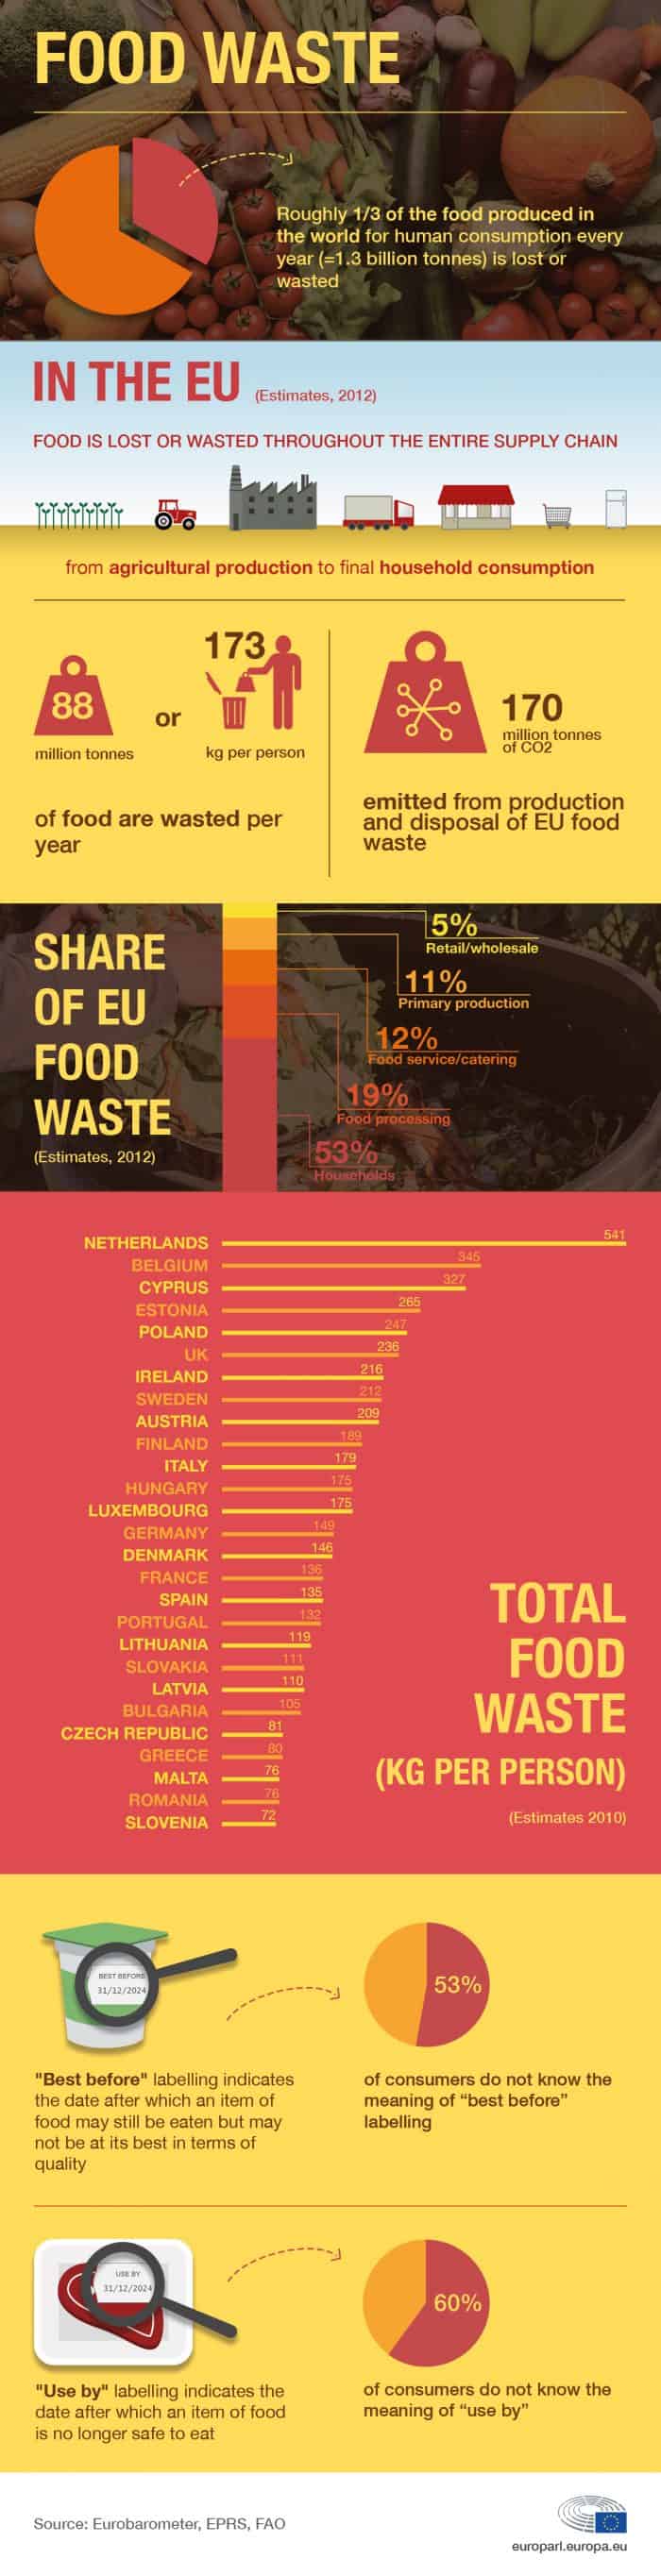 Infographic showing the results of research done on the food waste in the EU